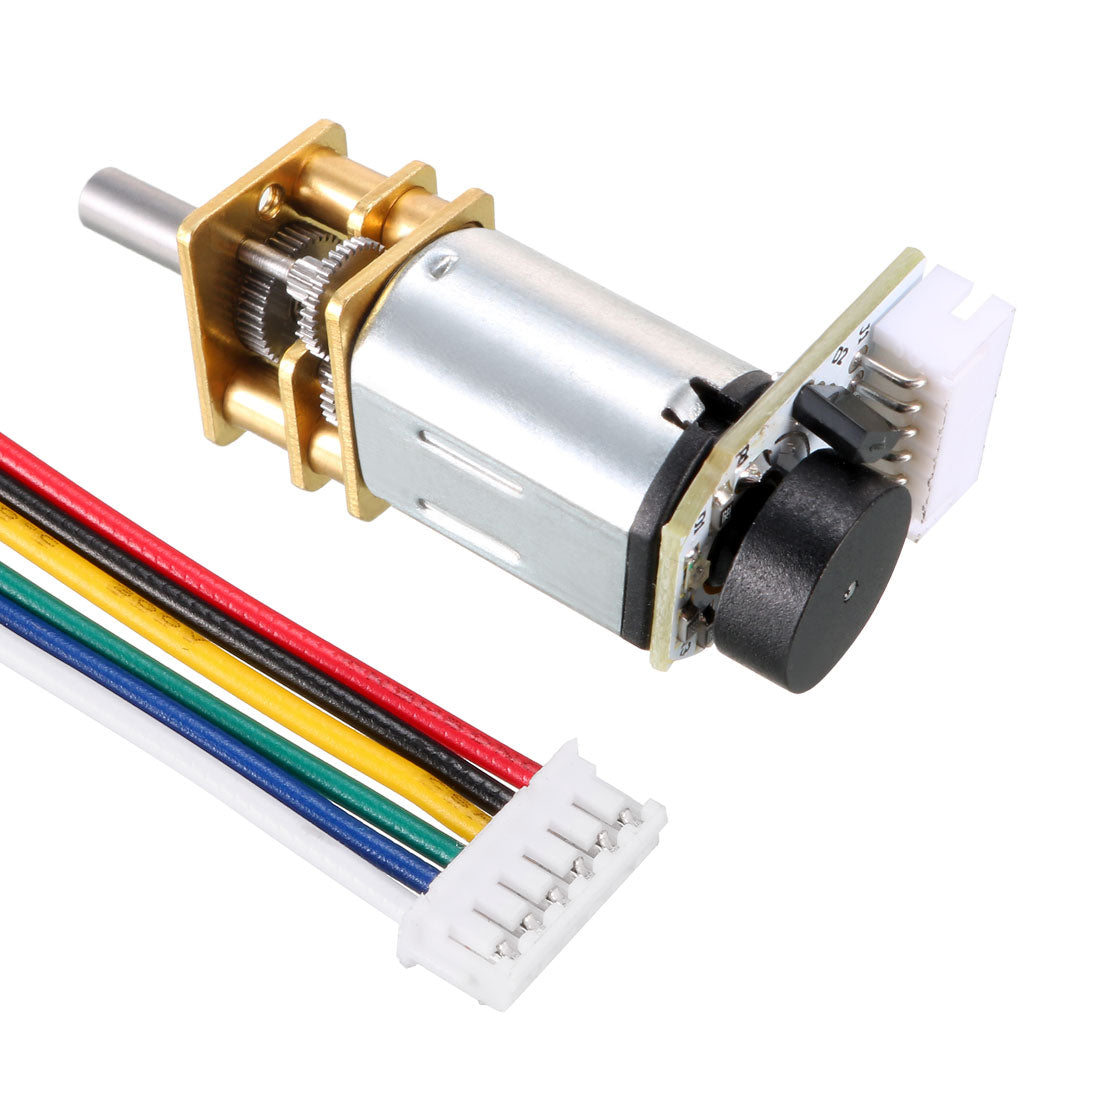 uxcell Uxcell DC 6V 35RPM Gear Motor Encoder Speed Velocity Measurement for Mini Car DIY